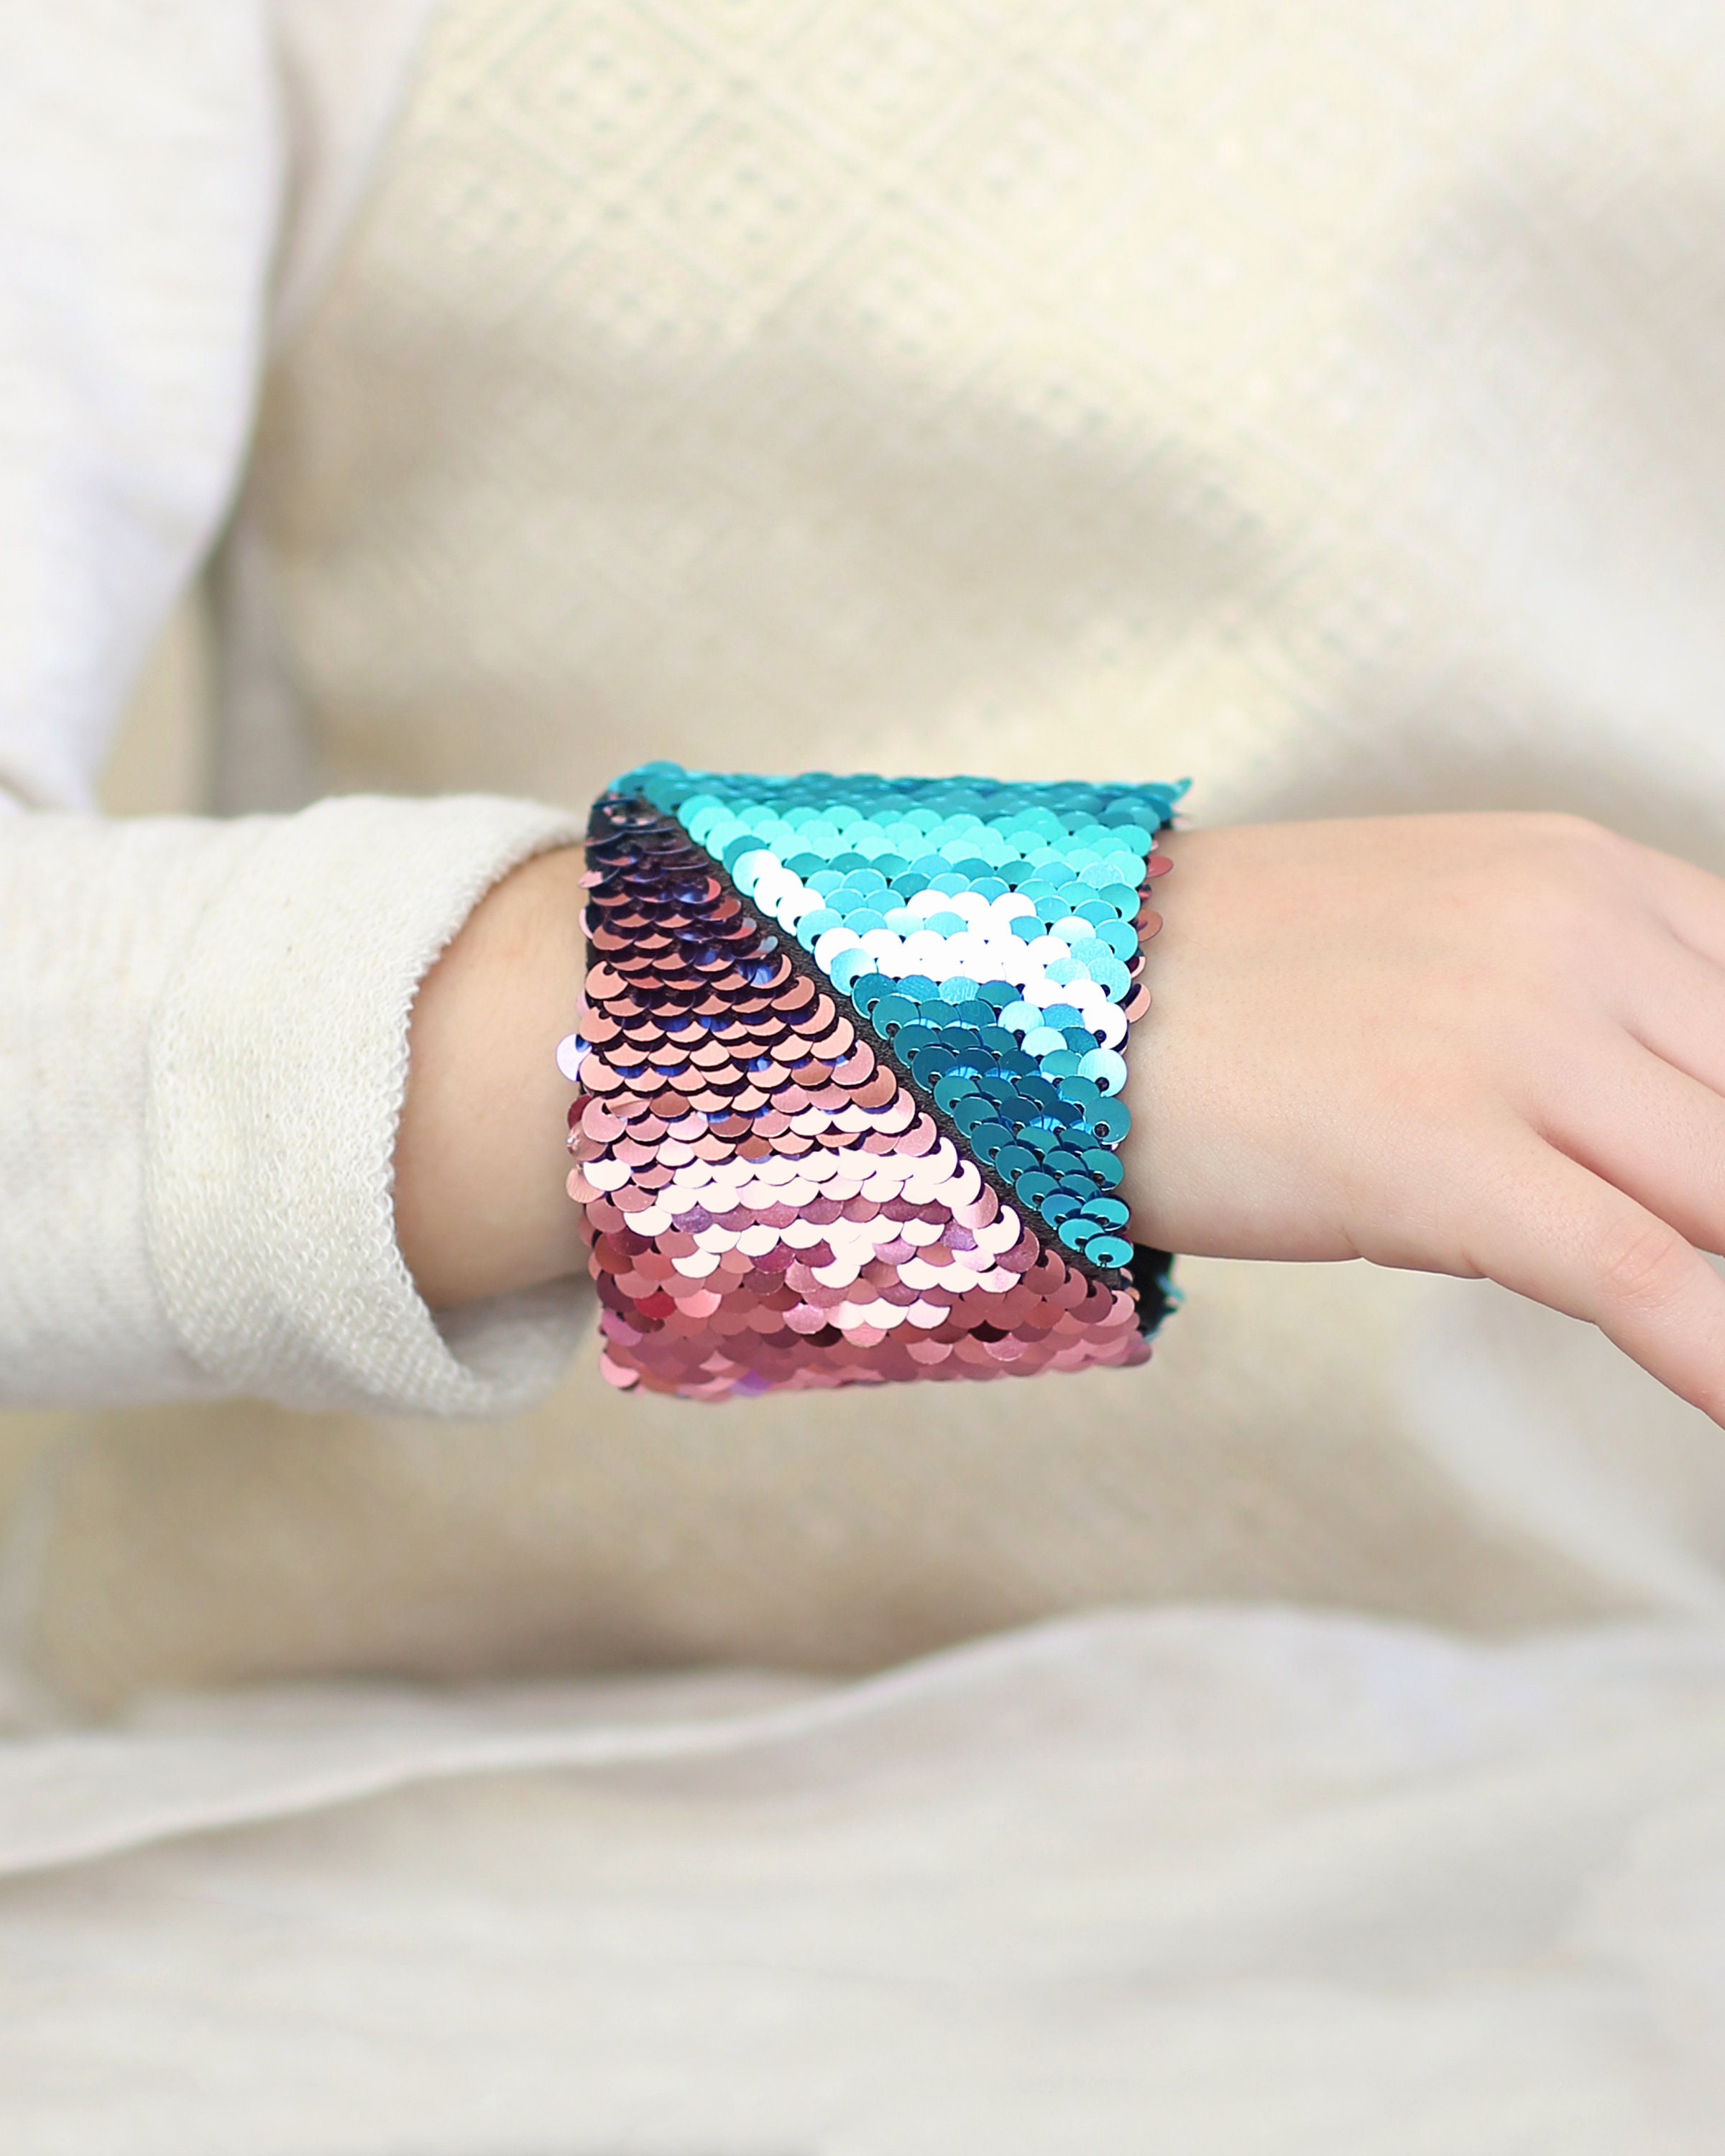 Reversible Glitter Mermaid Rave Bracelets With Two Color Sequin